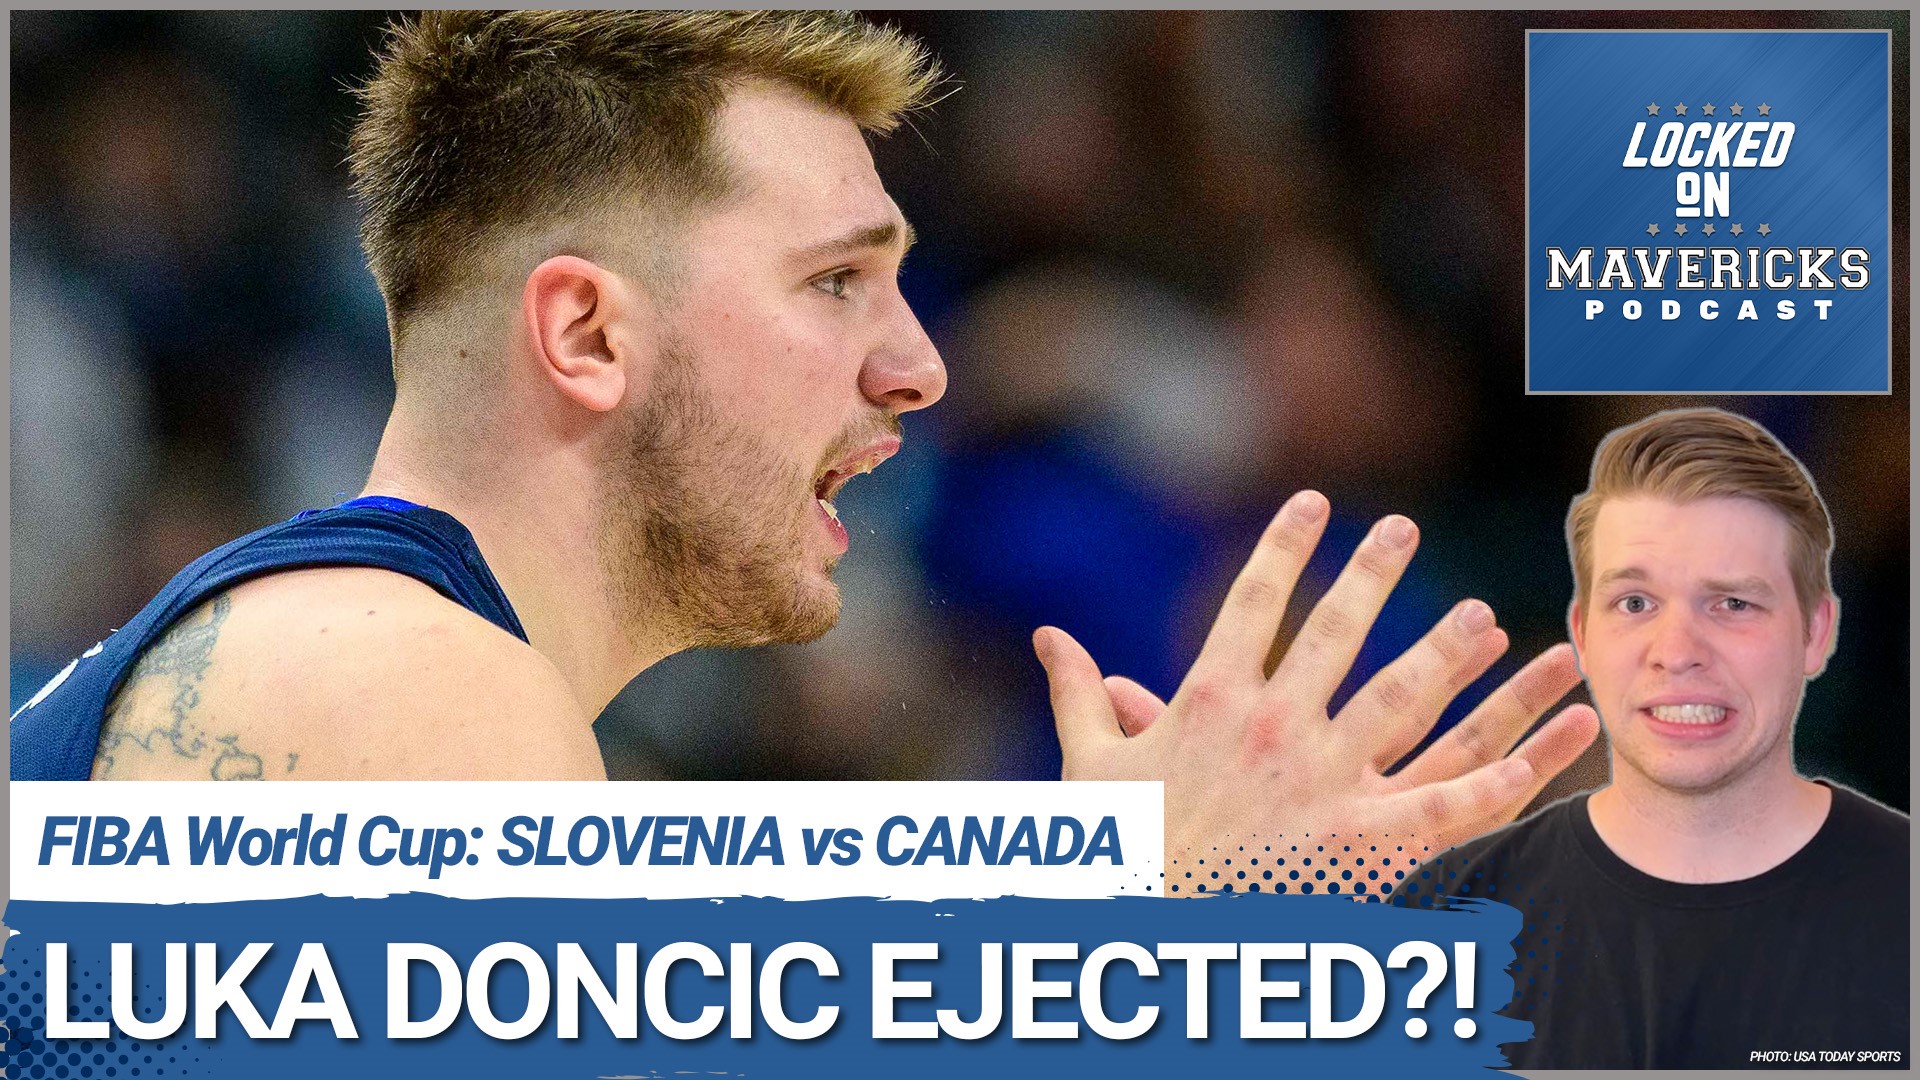 Nick Angstadt is joined by Sean Woodley (LockedOnRaptors)  to discuss Luka Doncic getting ejected and how Canada beat Slovenia in the FIBA World Cup 2023.